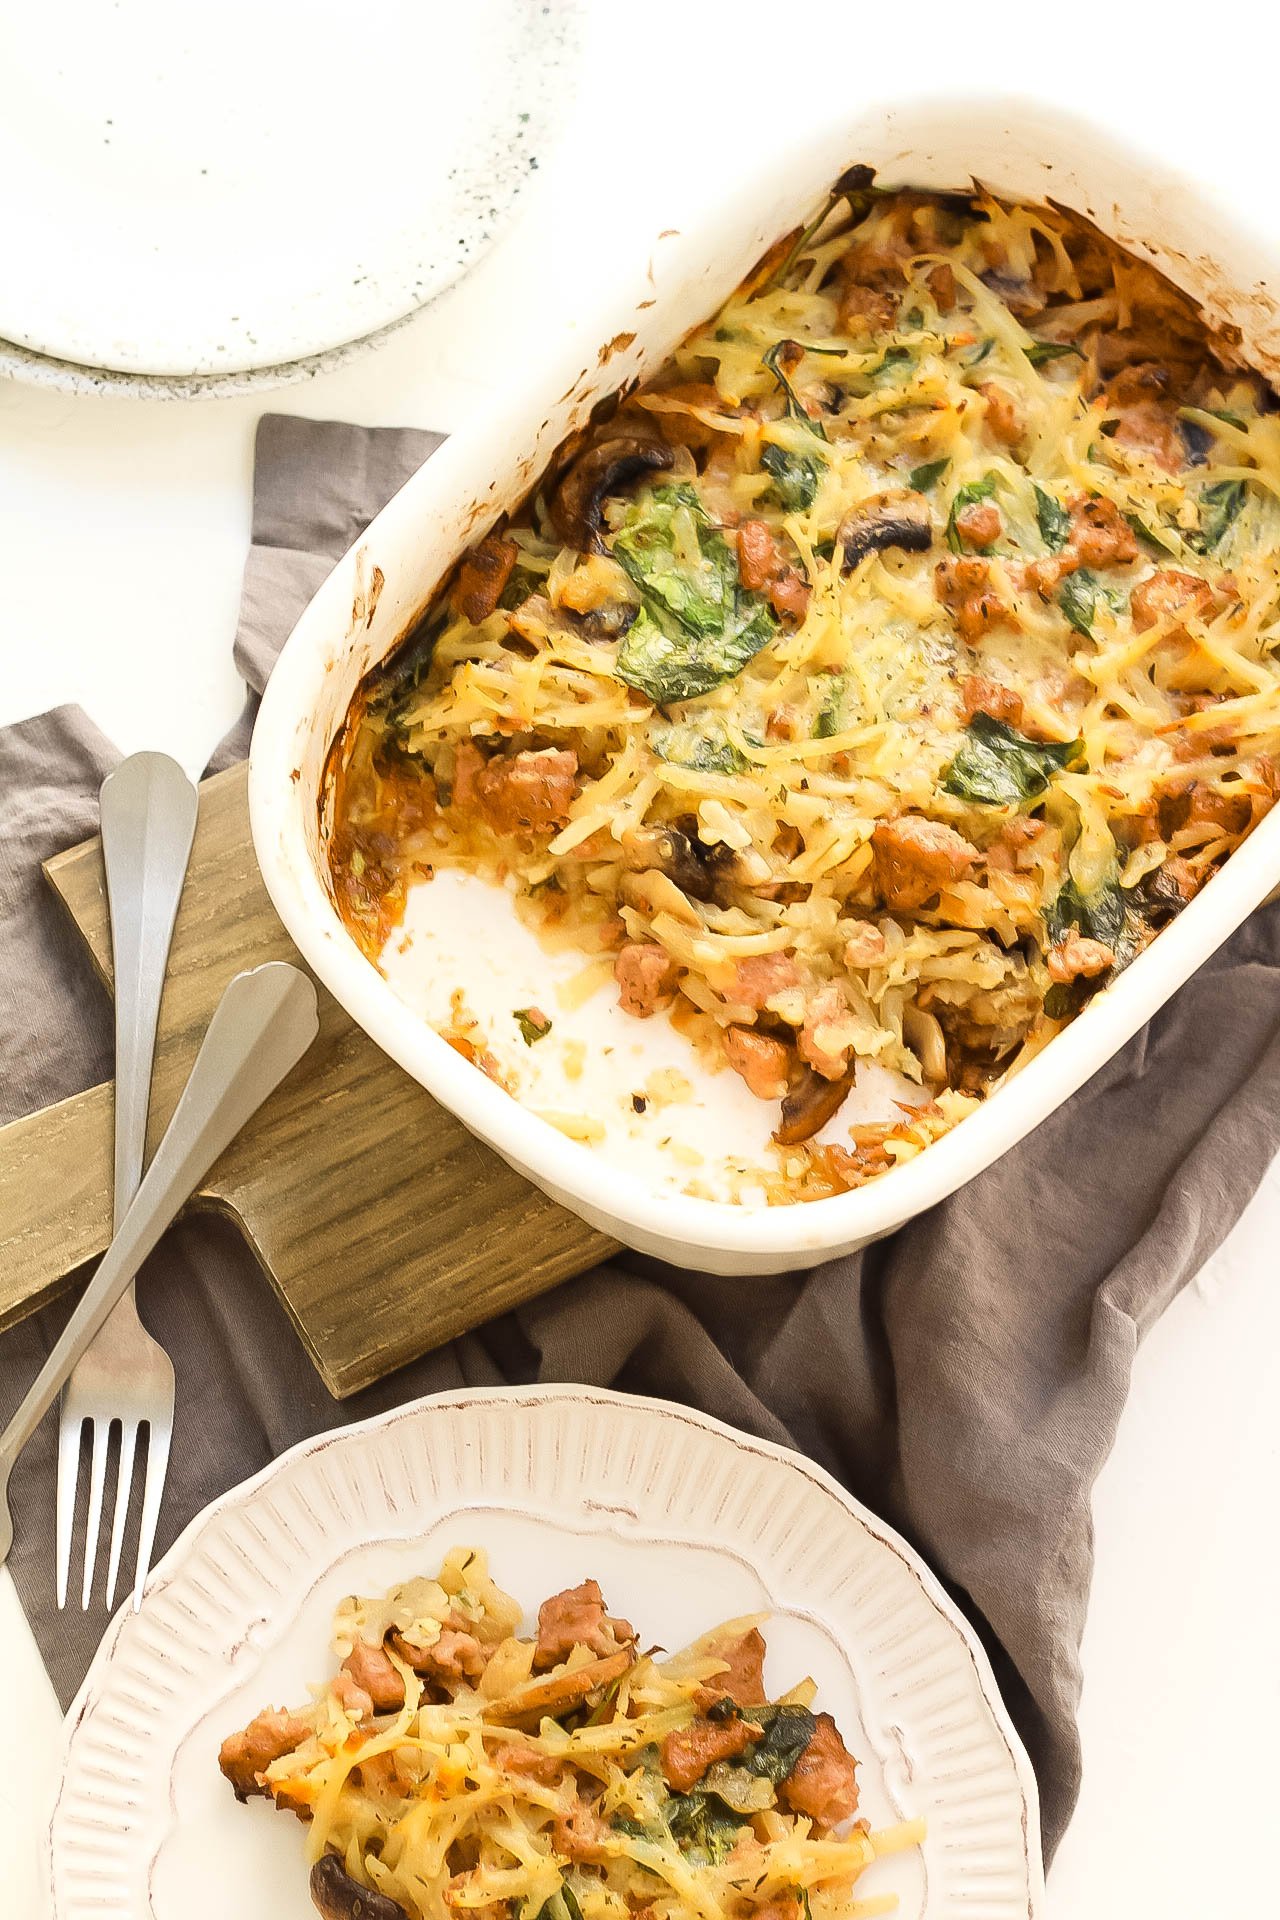 This creamy Whole30 casserole is the perfect easy and family friendly dinner. It's with sausage and potatoes in under an hour and is a creamy, comforting Paleo or Whole30 recipe. It would be great for meal prep, and I think the leftovers are almost more delicious! #whole30casserole #paleocasserole #whole30recipes #paleorecipes